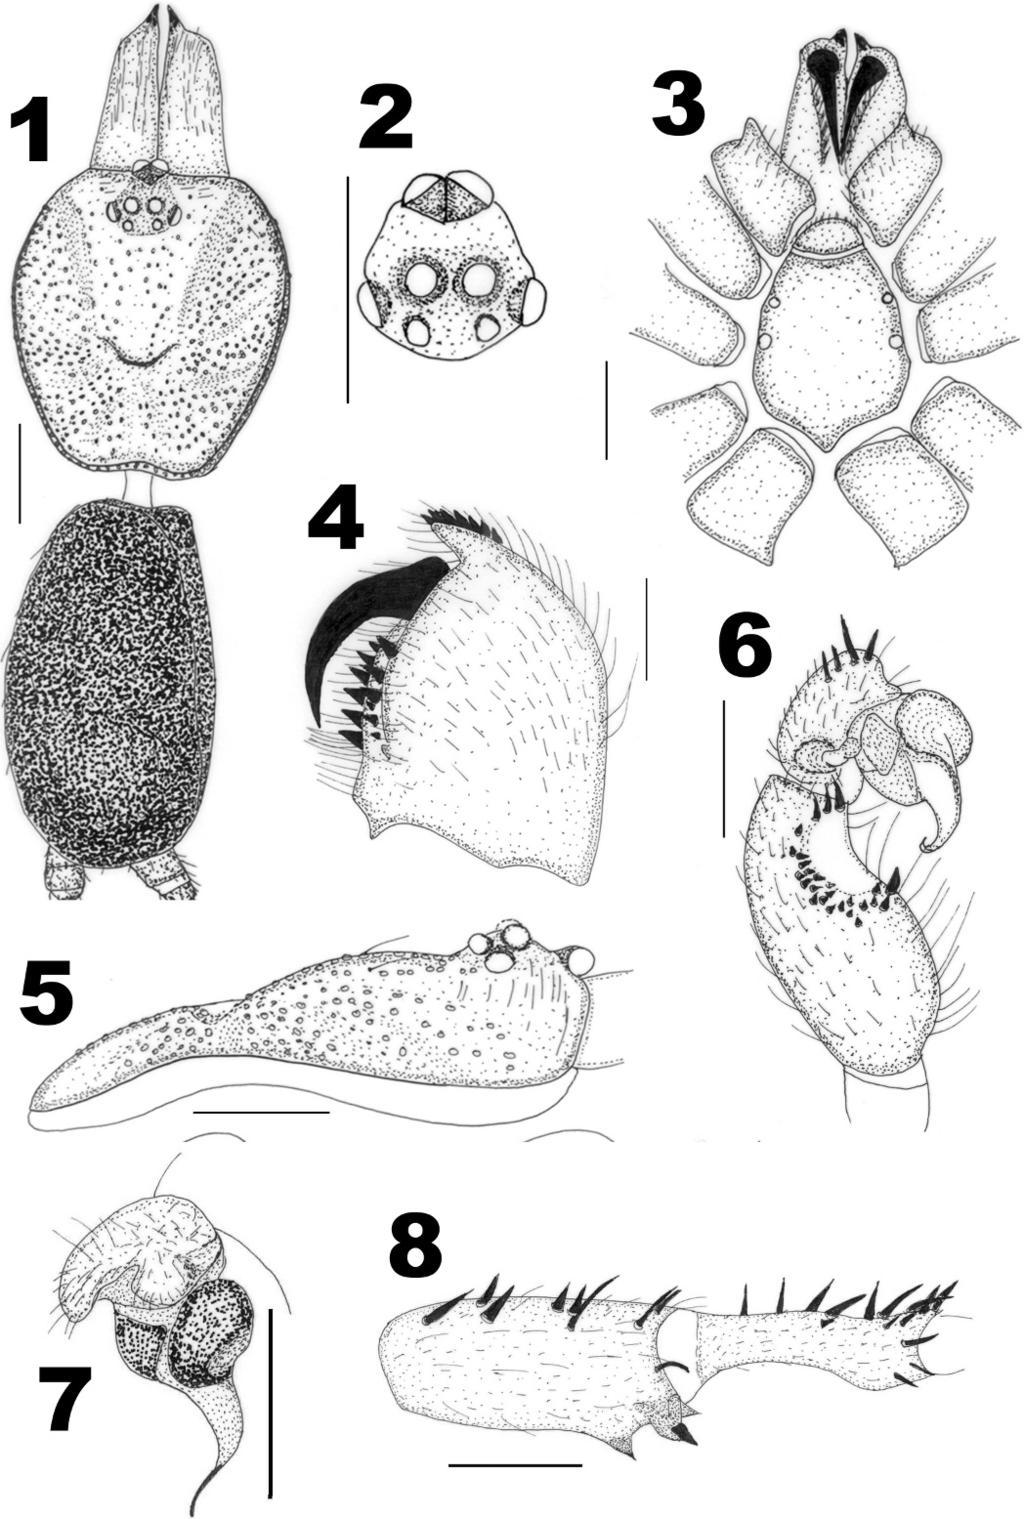 86 THE JOURNAL OF ARACHNOLOGY Figures 1 8. Idiops bombayensis male from Aarey Milk Colony. 1. Cephalothorax and abdomen, dorsal view; 2. Eyes; 3. Sternum, labium, maxillae and chelicerae; 4.